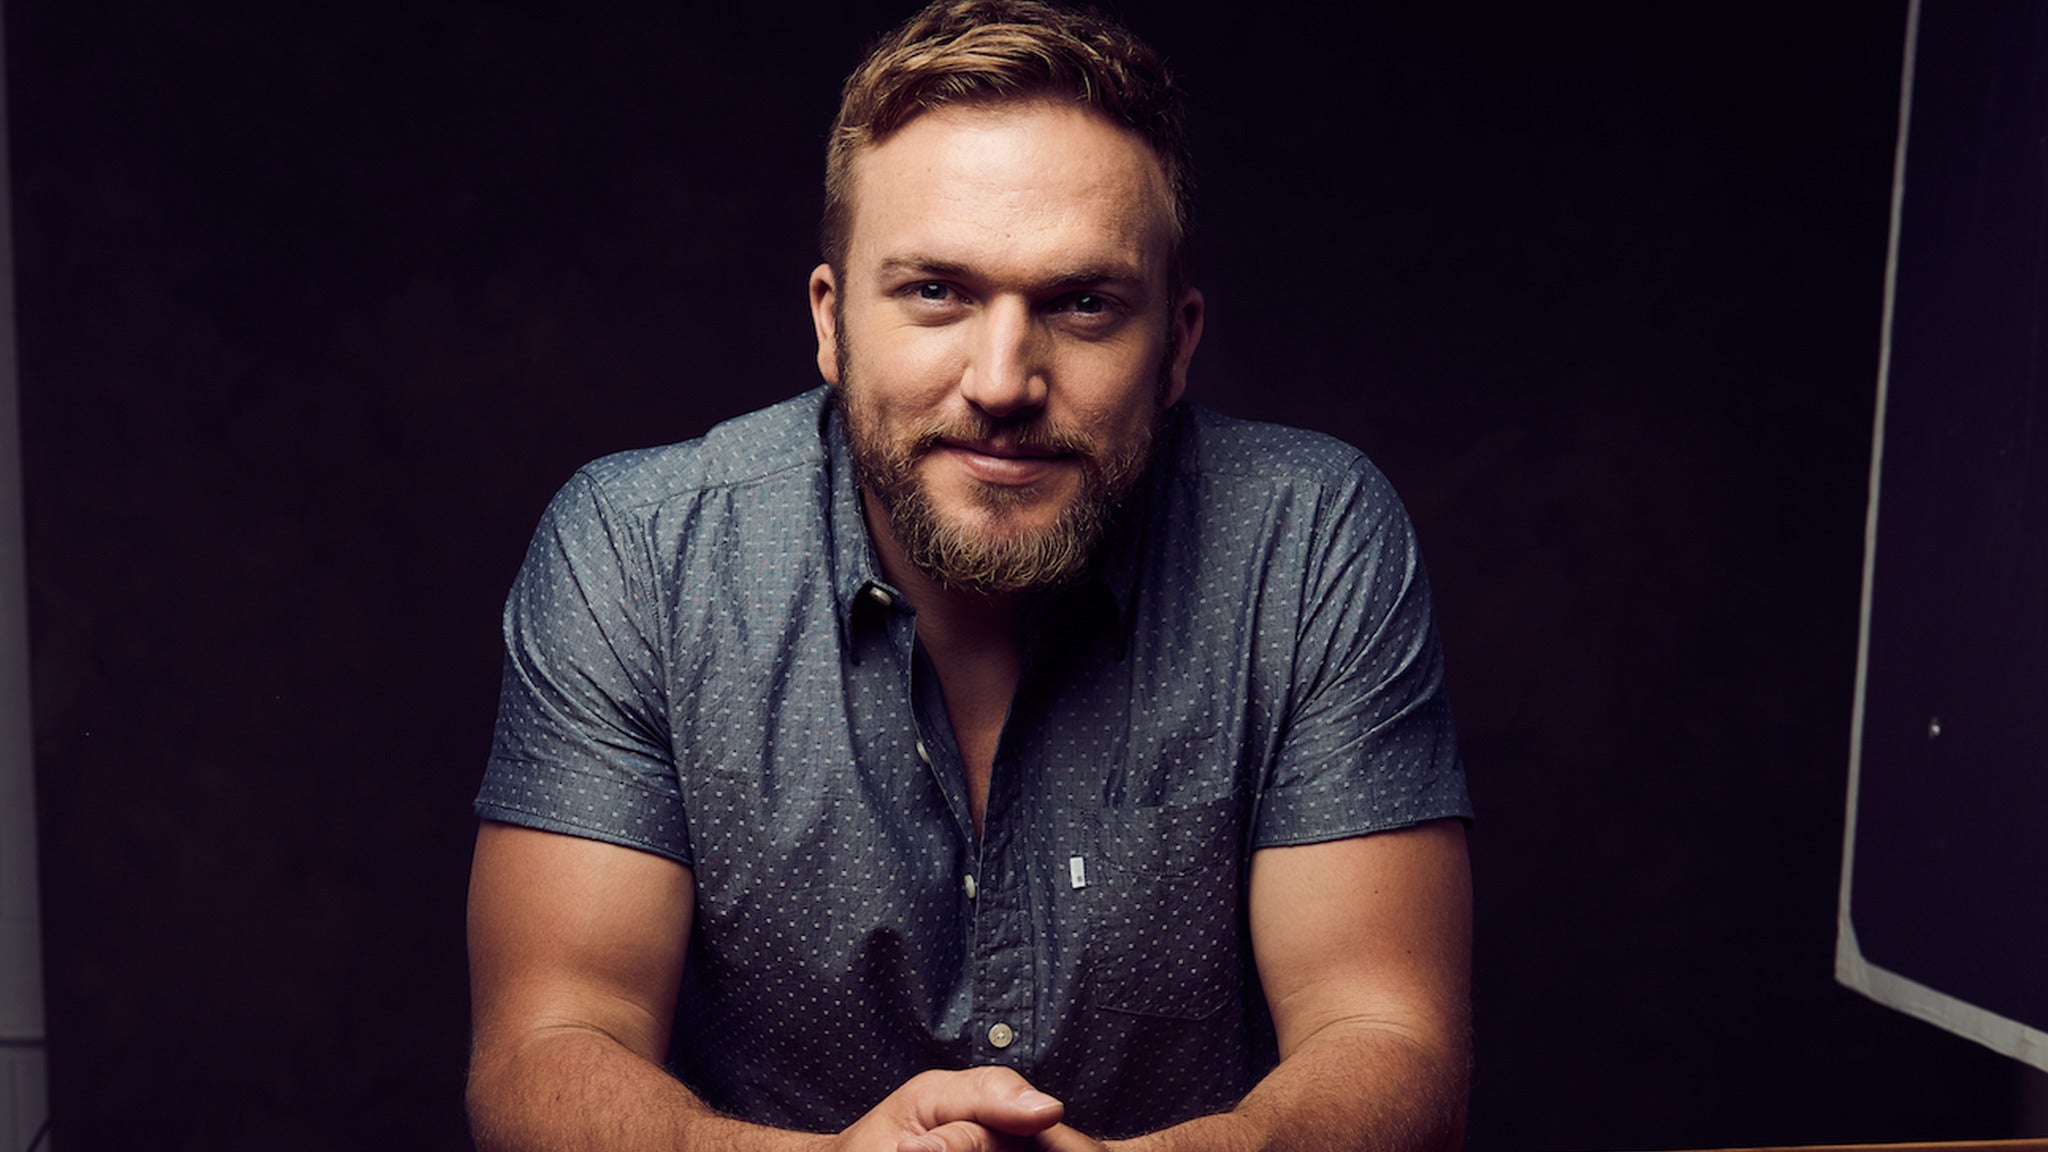 Logan Mize in San Diego promo photo for Live Nation presale offer code